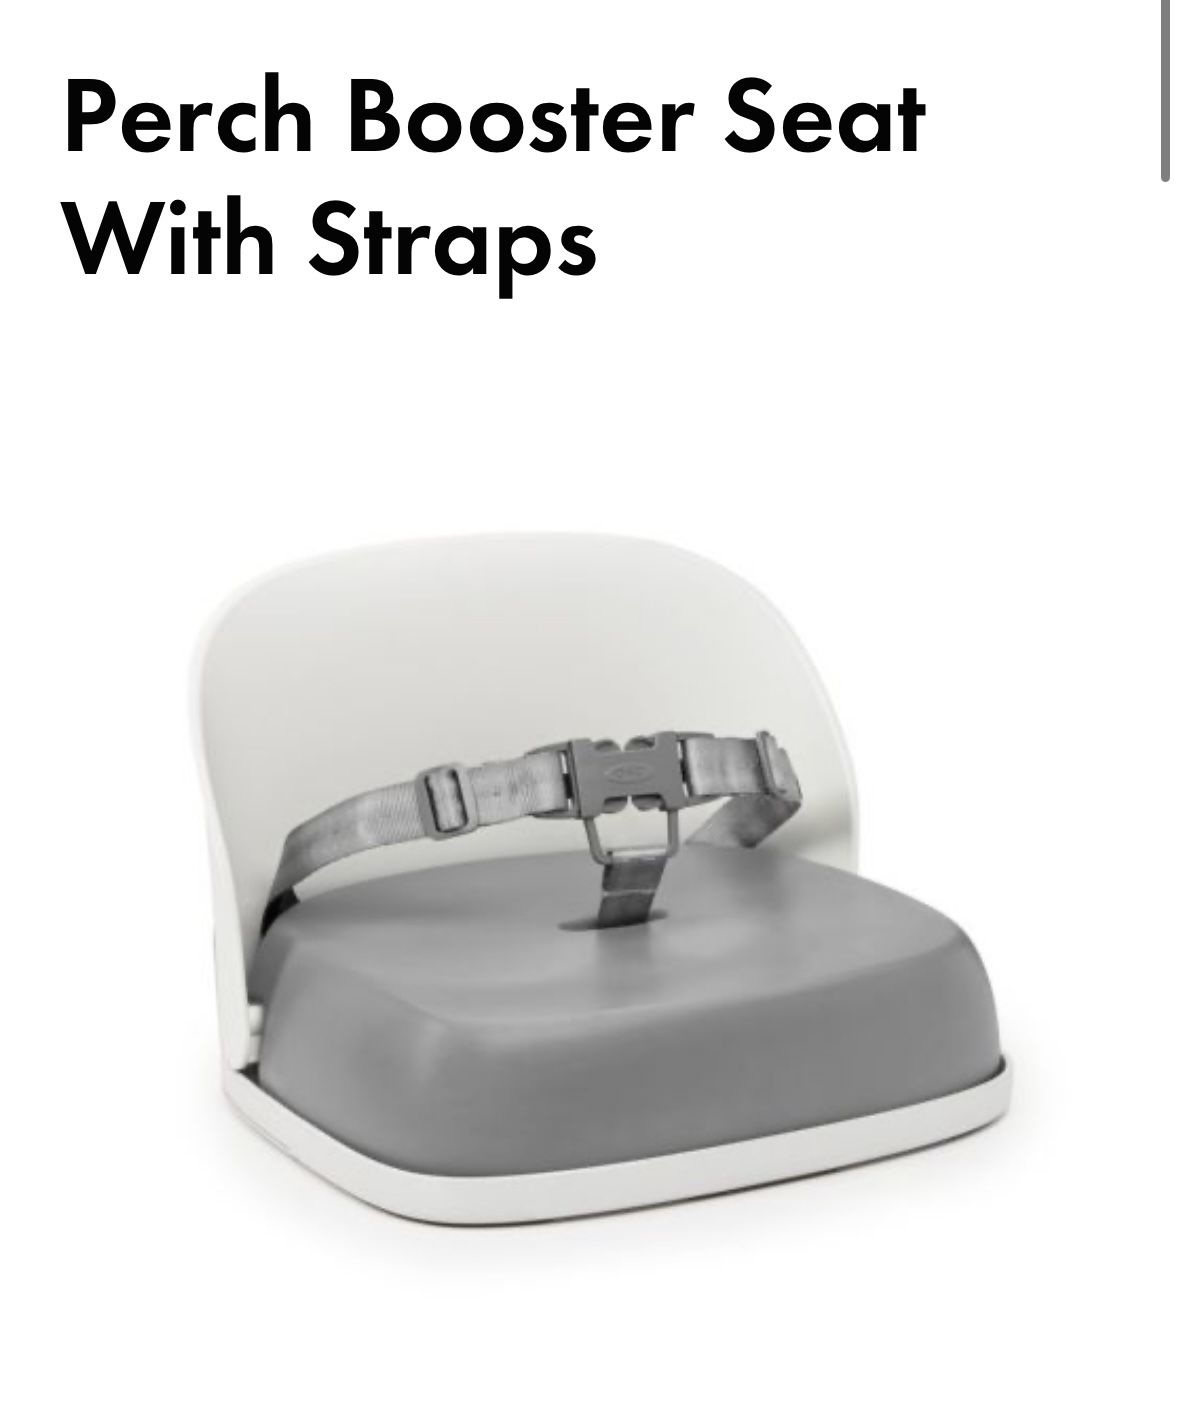 OXO Perch Booster Seat With Straps